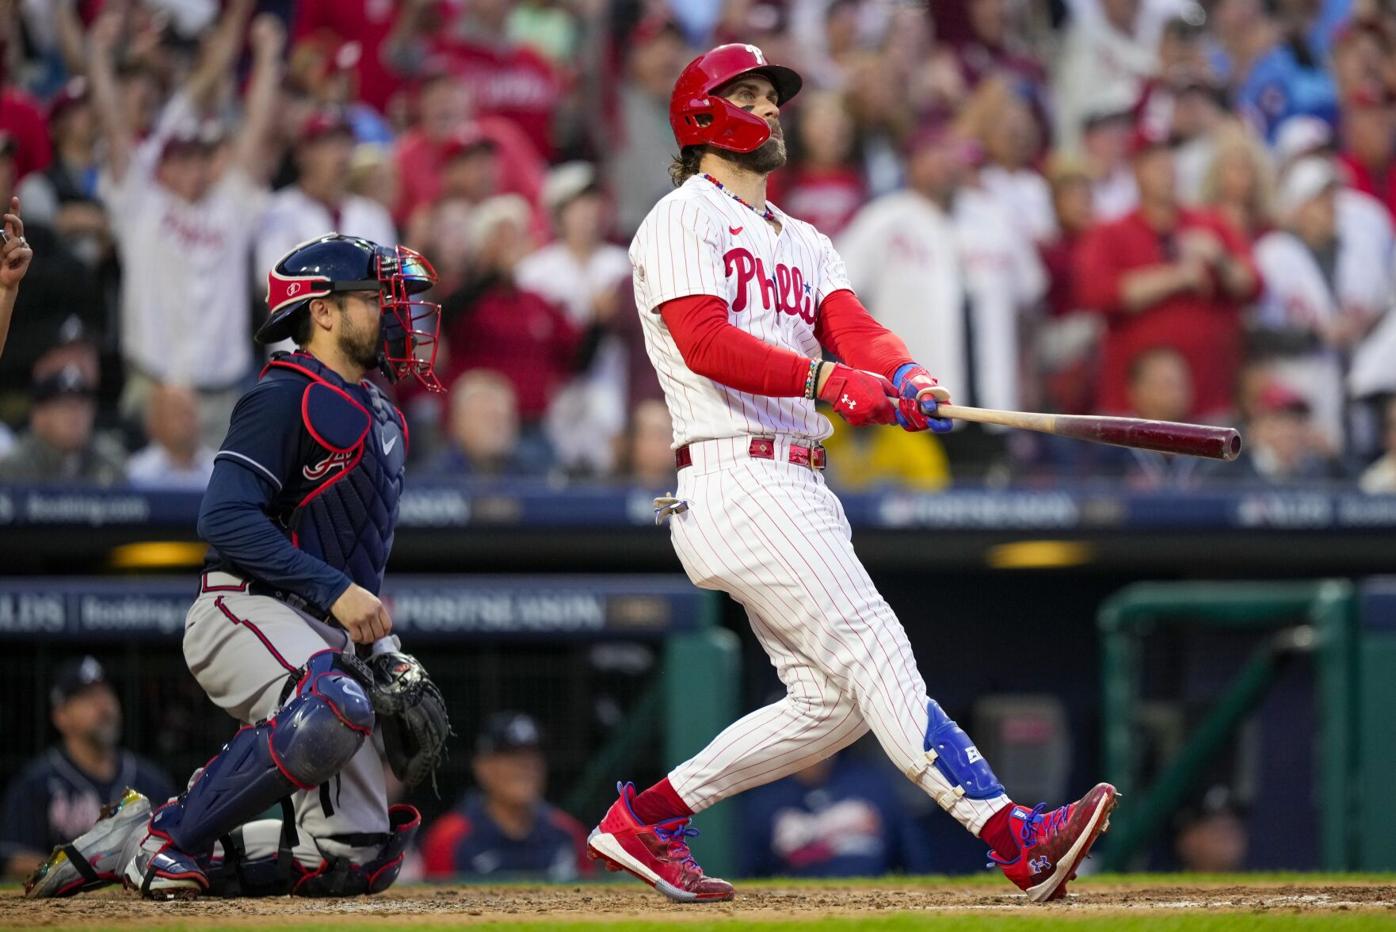 The Bryce brand: Phillies' Harper is intimately involved with how